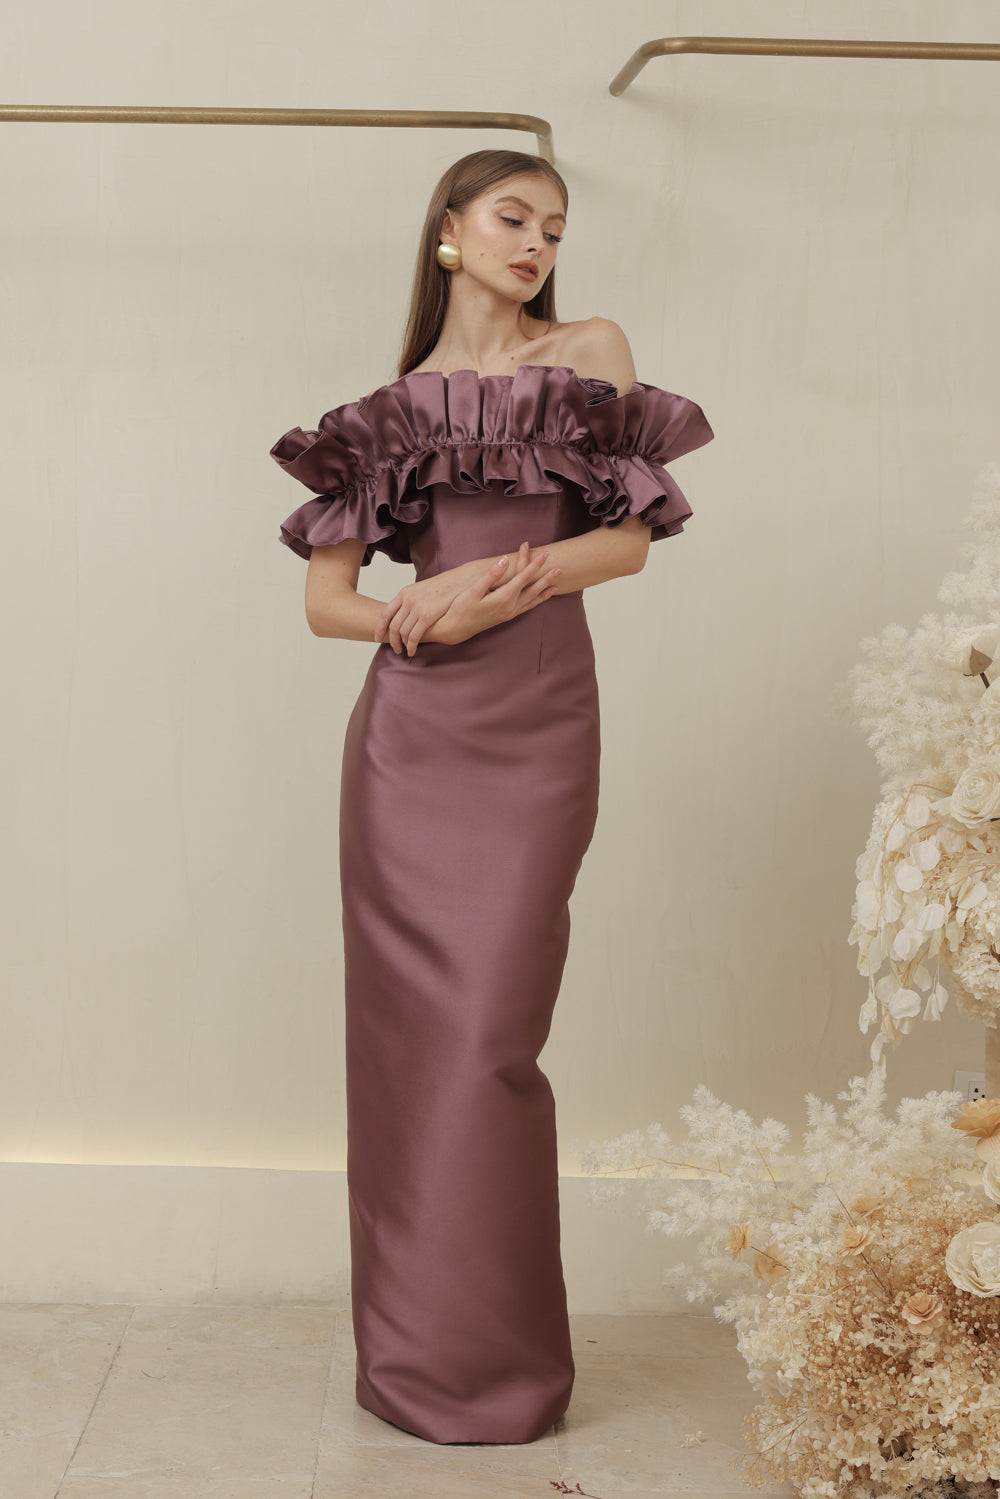 CLEMENTINE DRESS Off Shoulder Pencil Skirt Maxi Gown with Oversize Ruffle (Dark Mauve Dupioni)